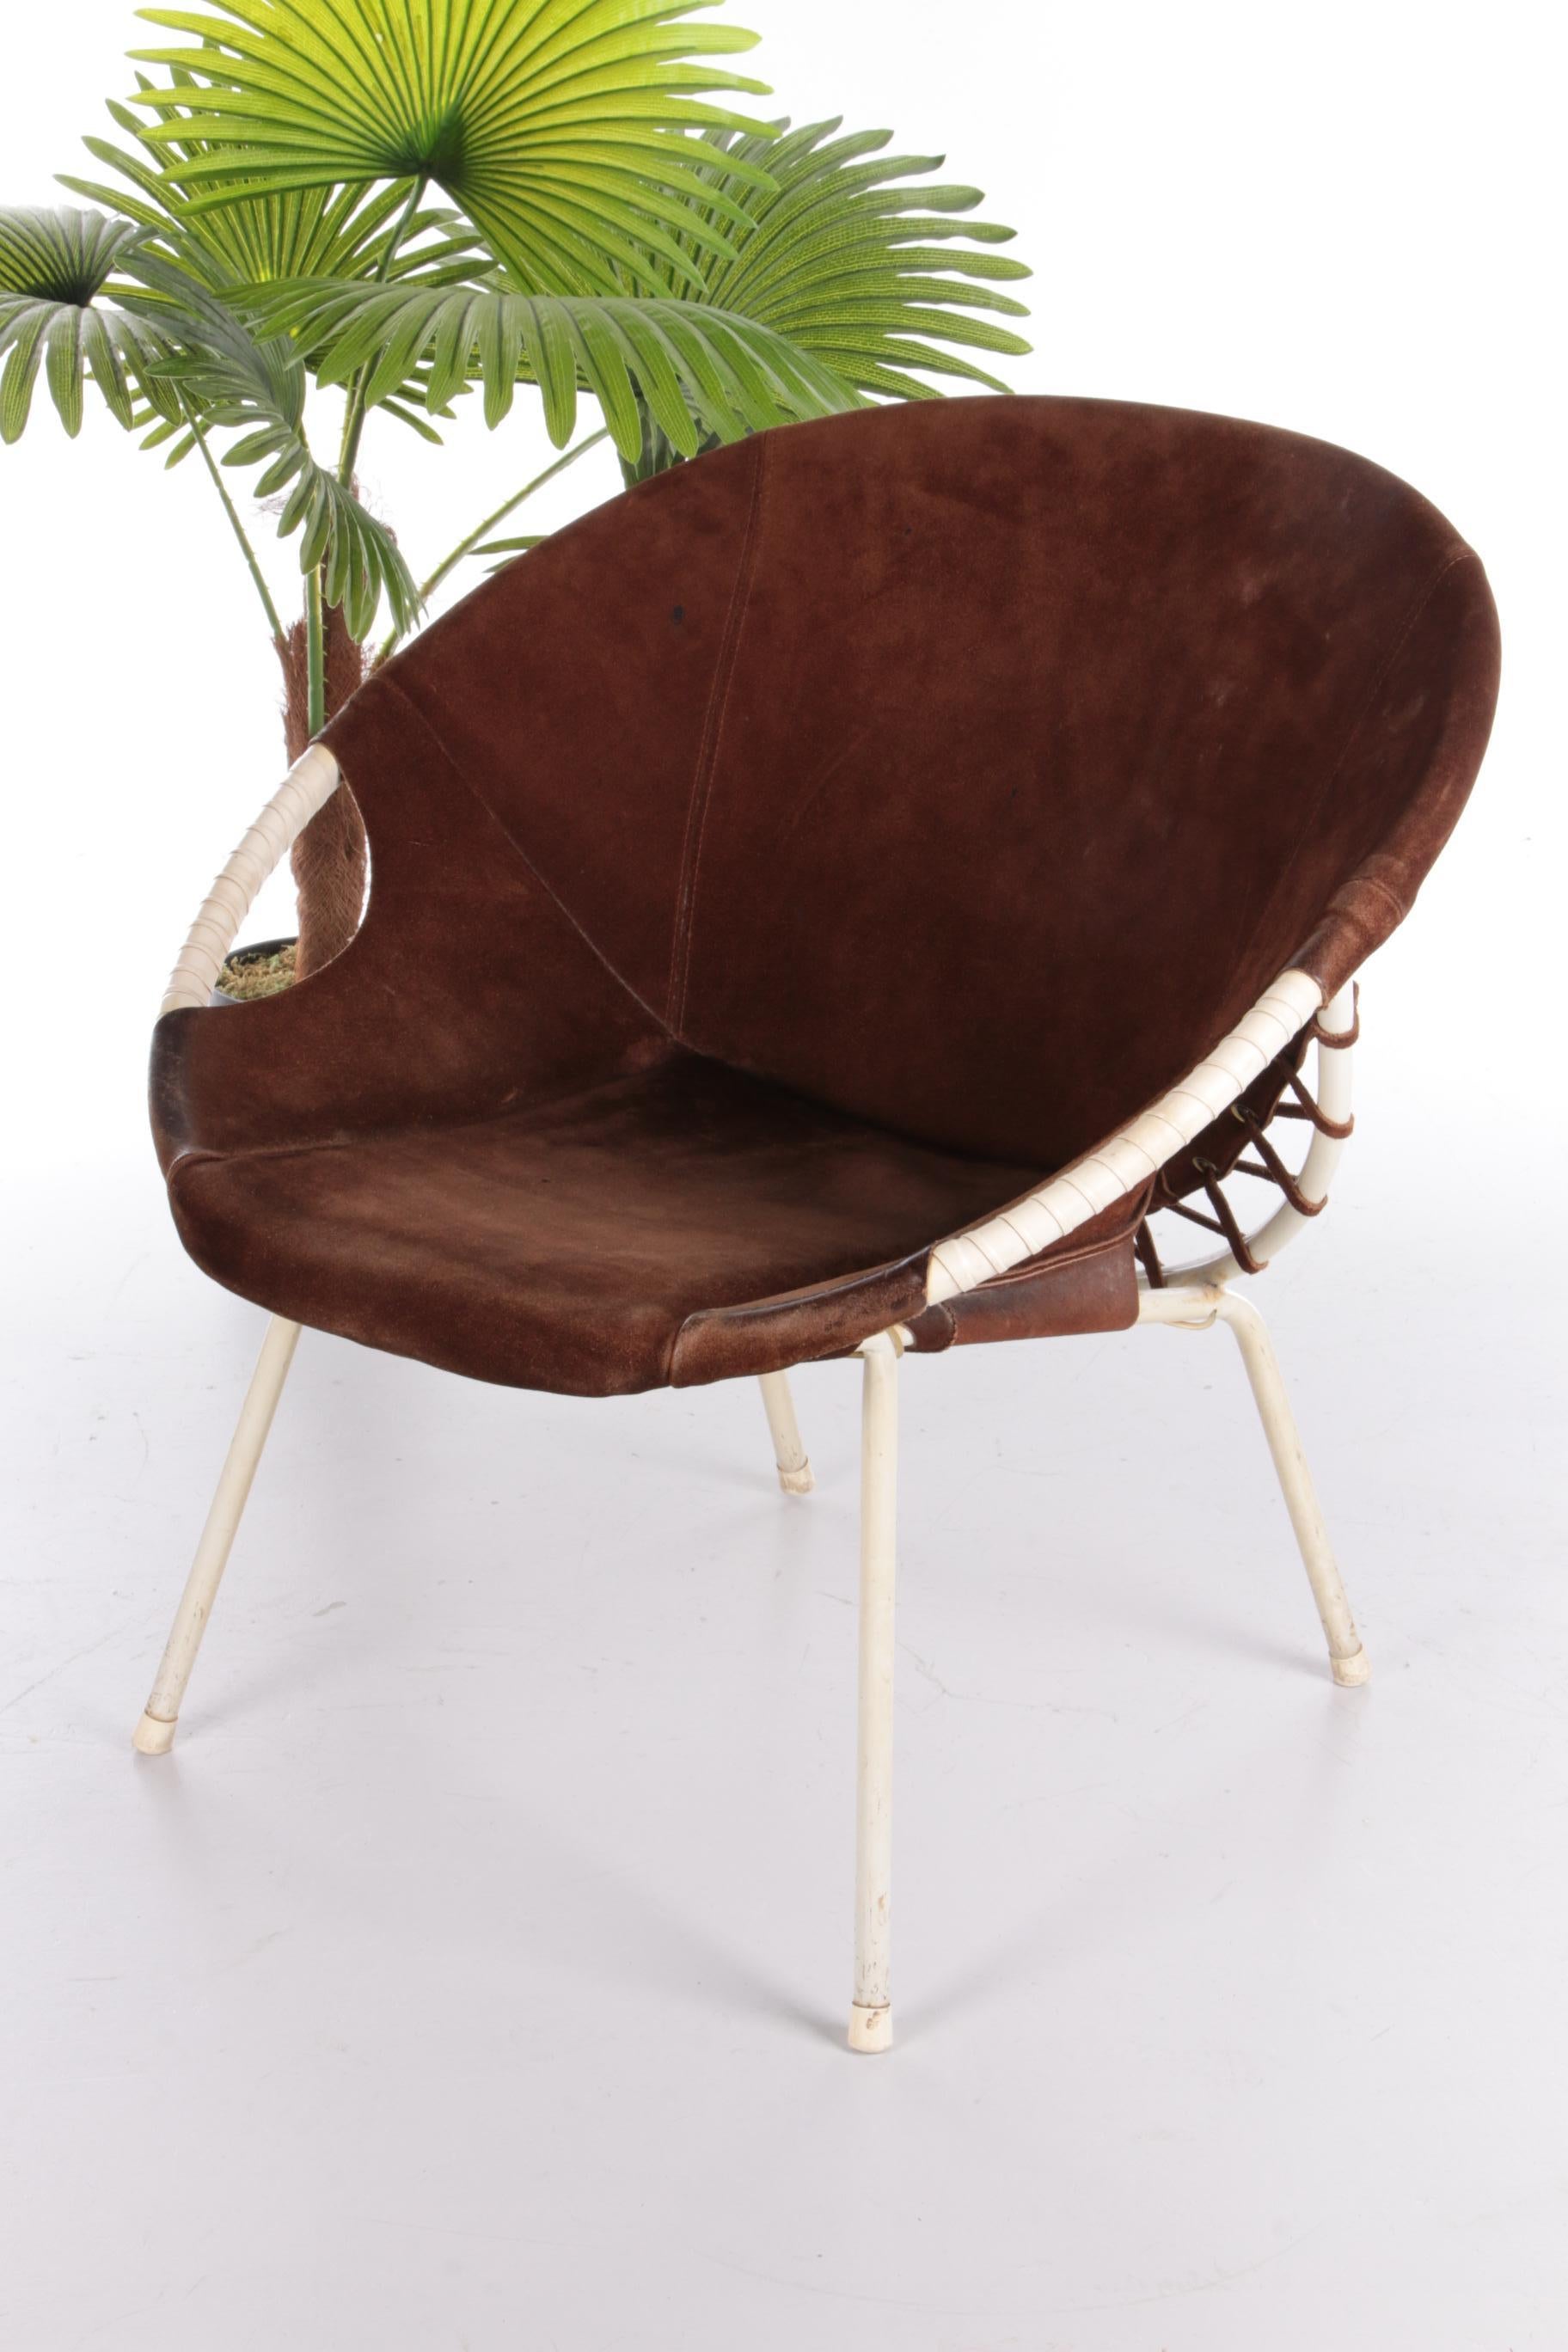 Vintage Balloon chair design by Lusch Erzeugnis 1960s

A beautiful suede bucket seat, also called the balloon chair. Designed by Lusch Erzeugnis.

Produced in Germany by Lusch & Co in the 1960s.

It is a special chair with a black metal frame